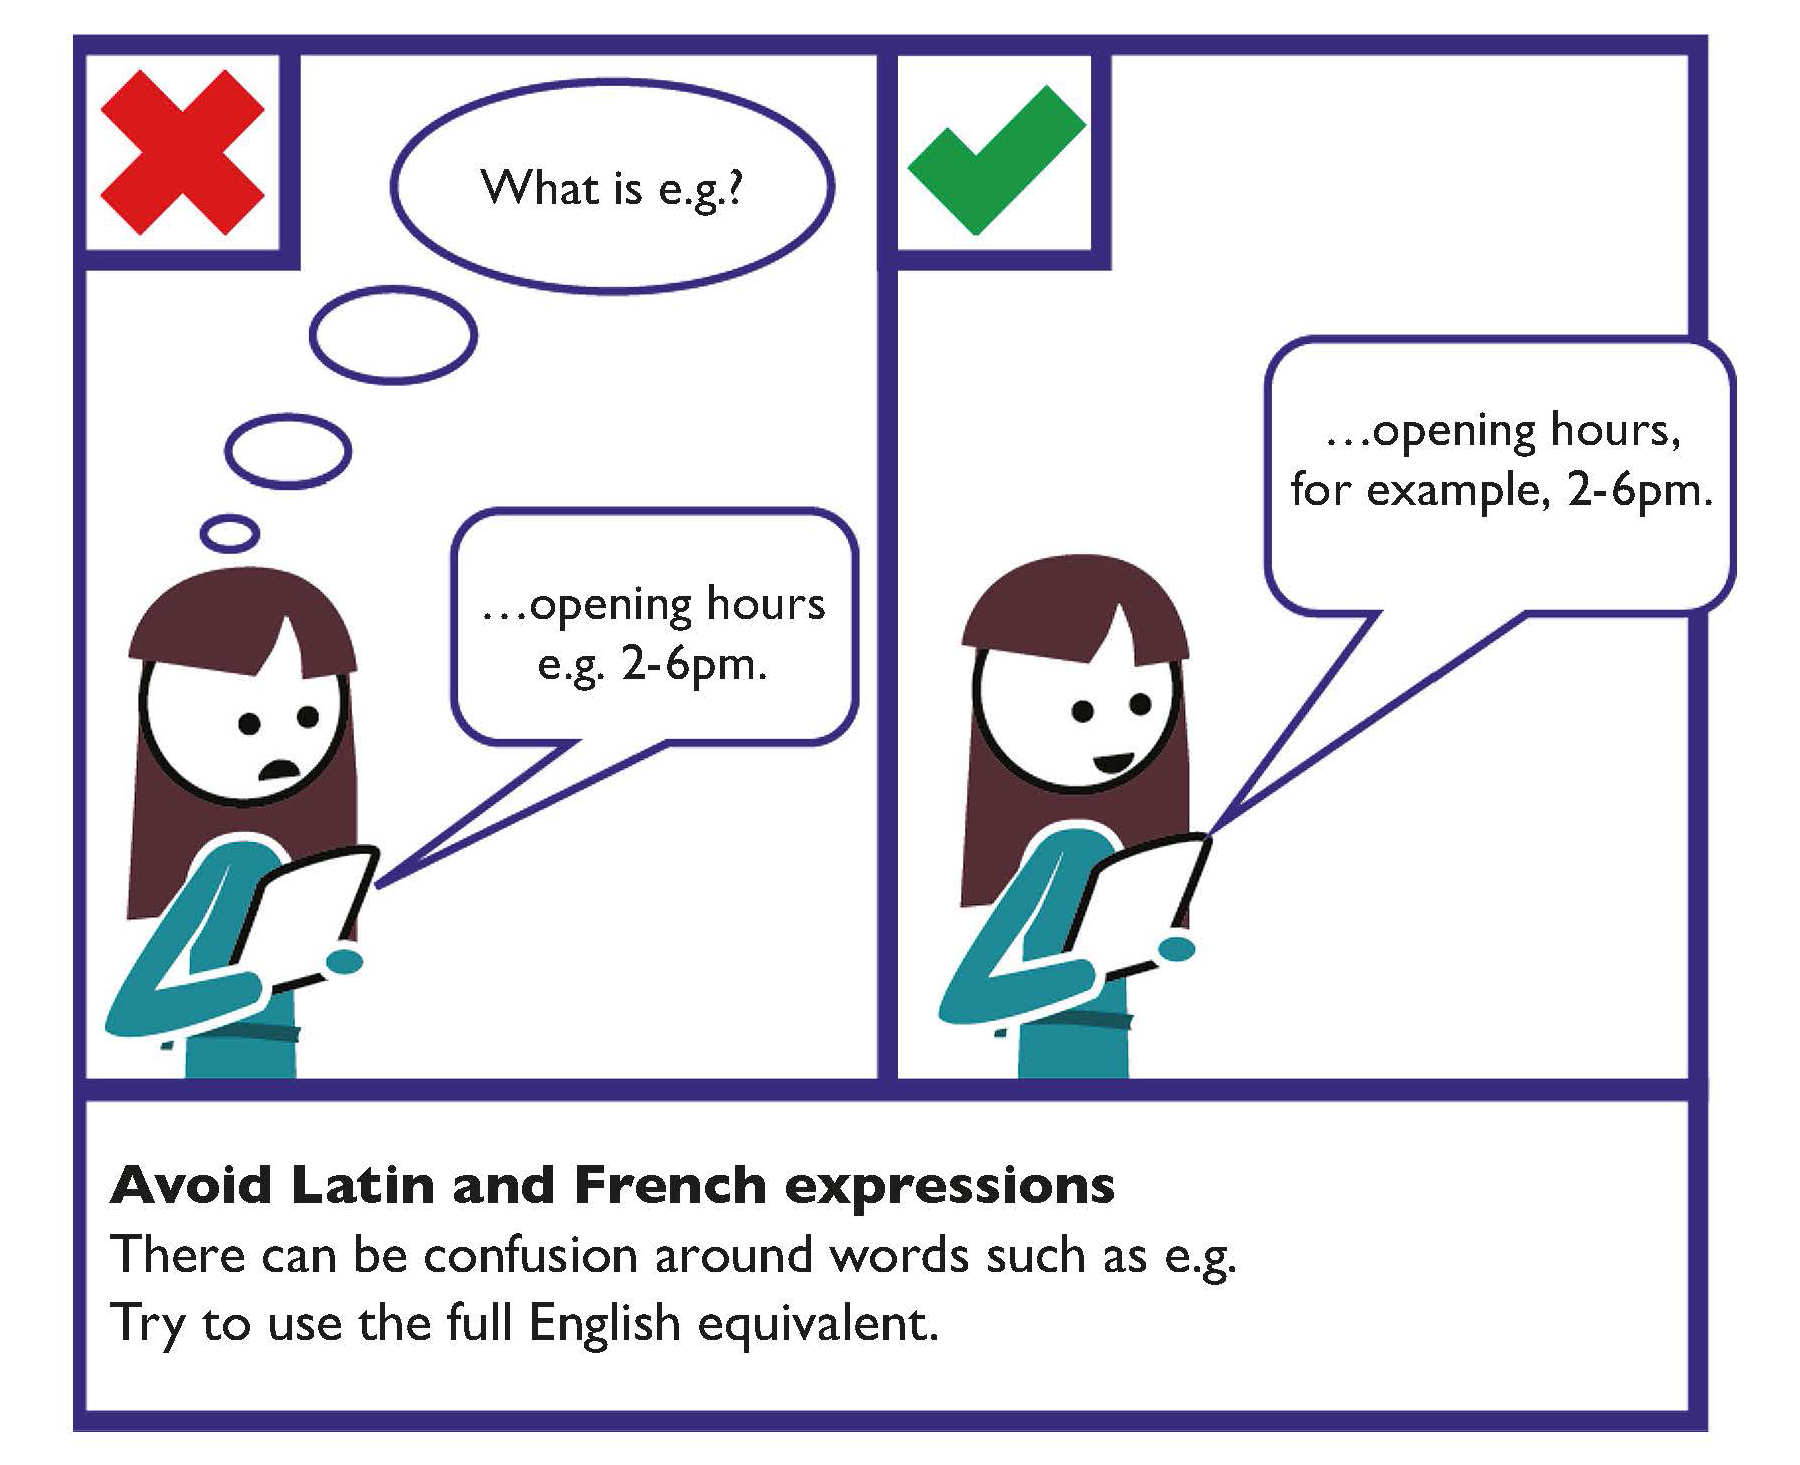 Use full English equivalent instead of Latin and French expressions, use example instead of e.g.